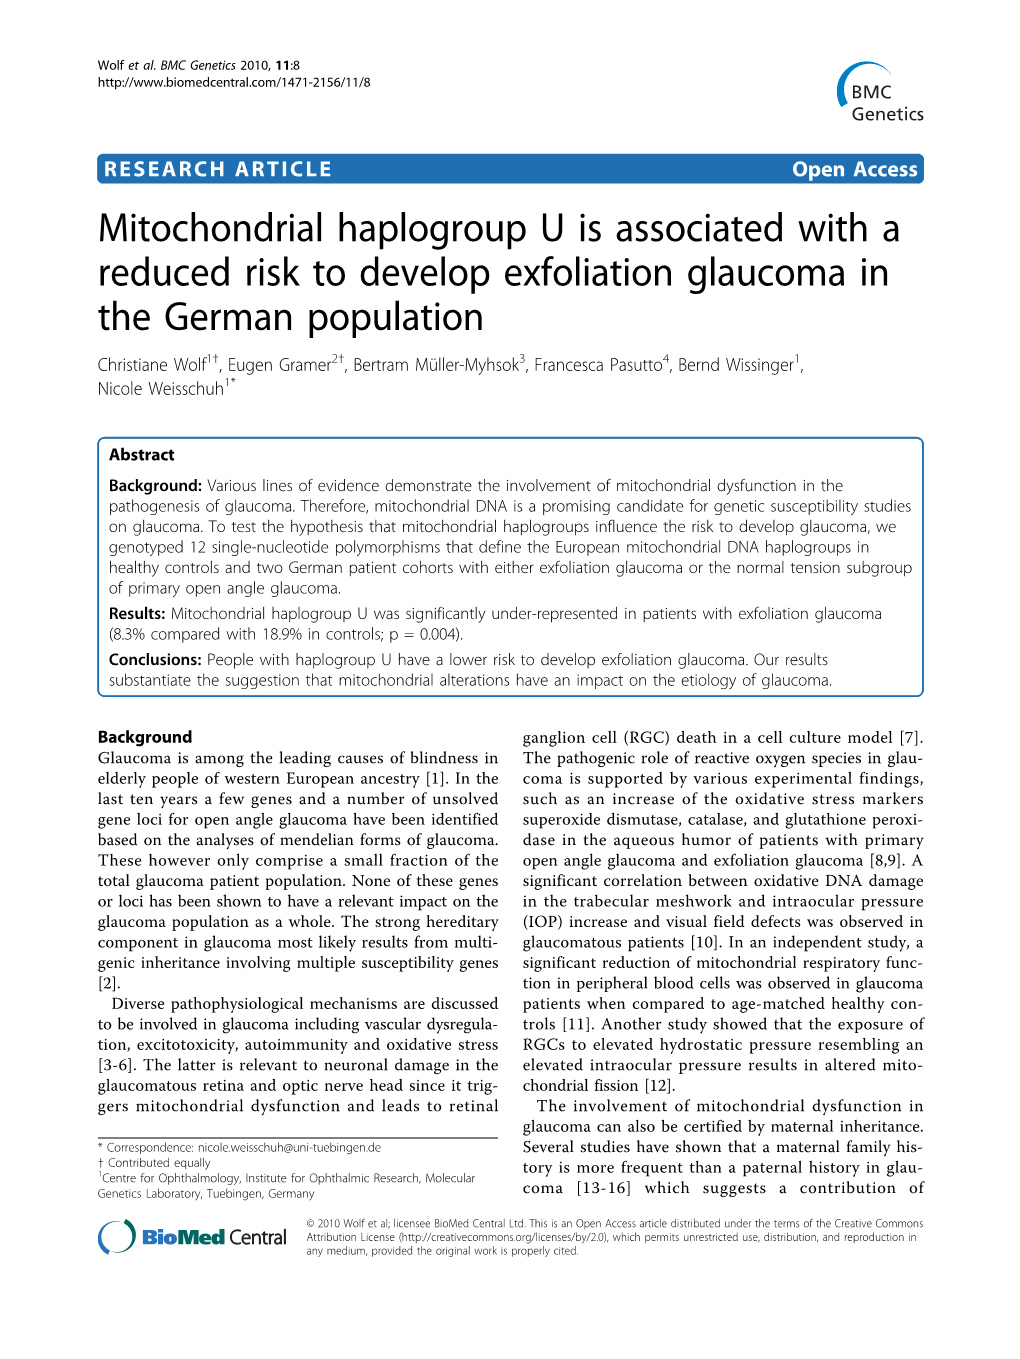 Mitochondrial Haplogroup U Is Associated with a Reduced Risk To